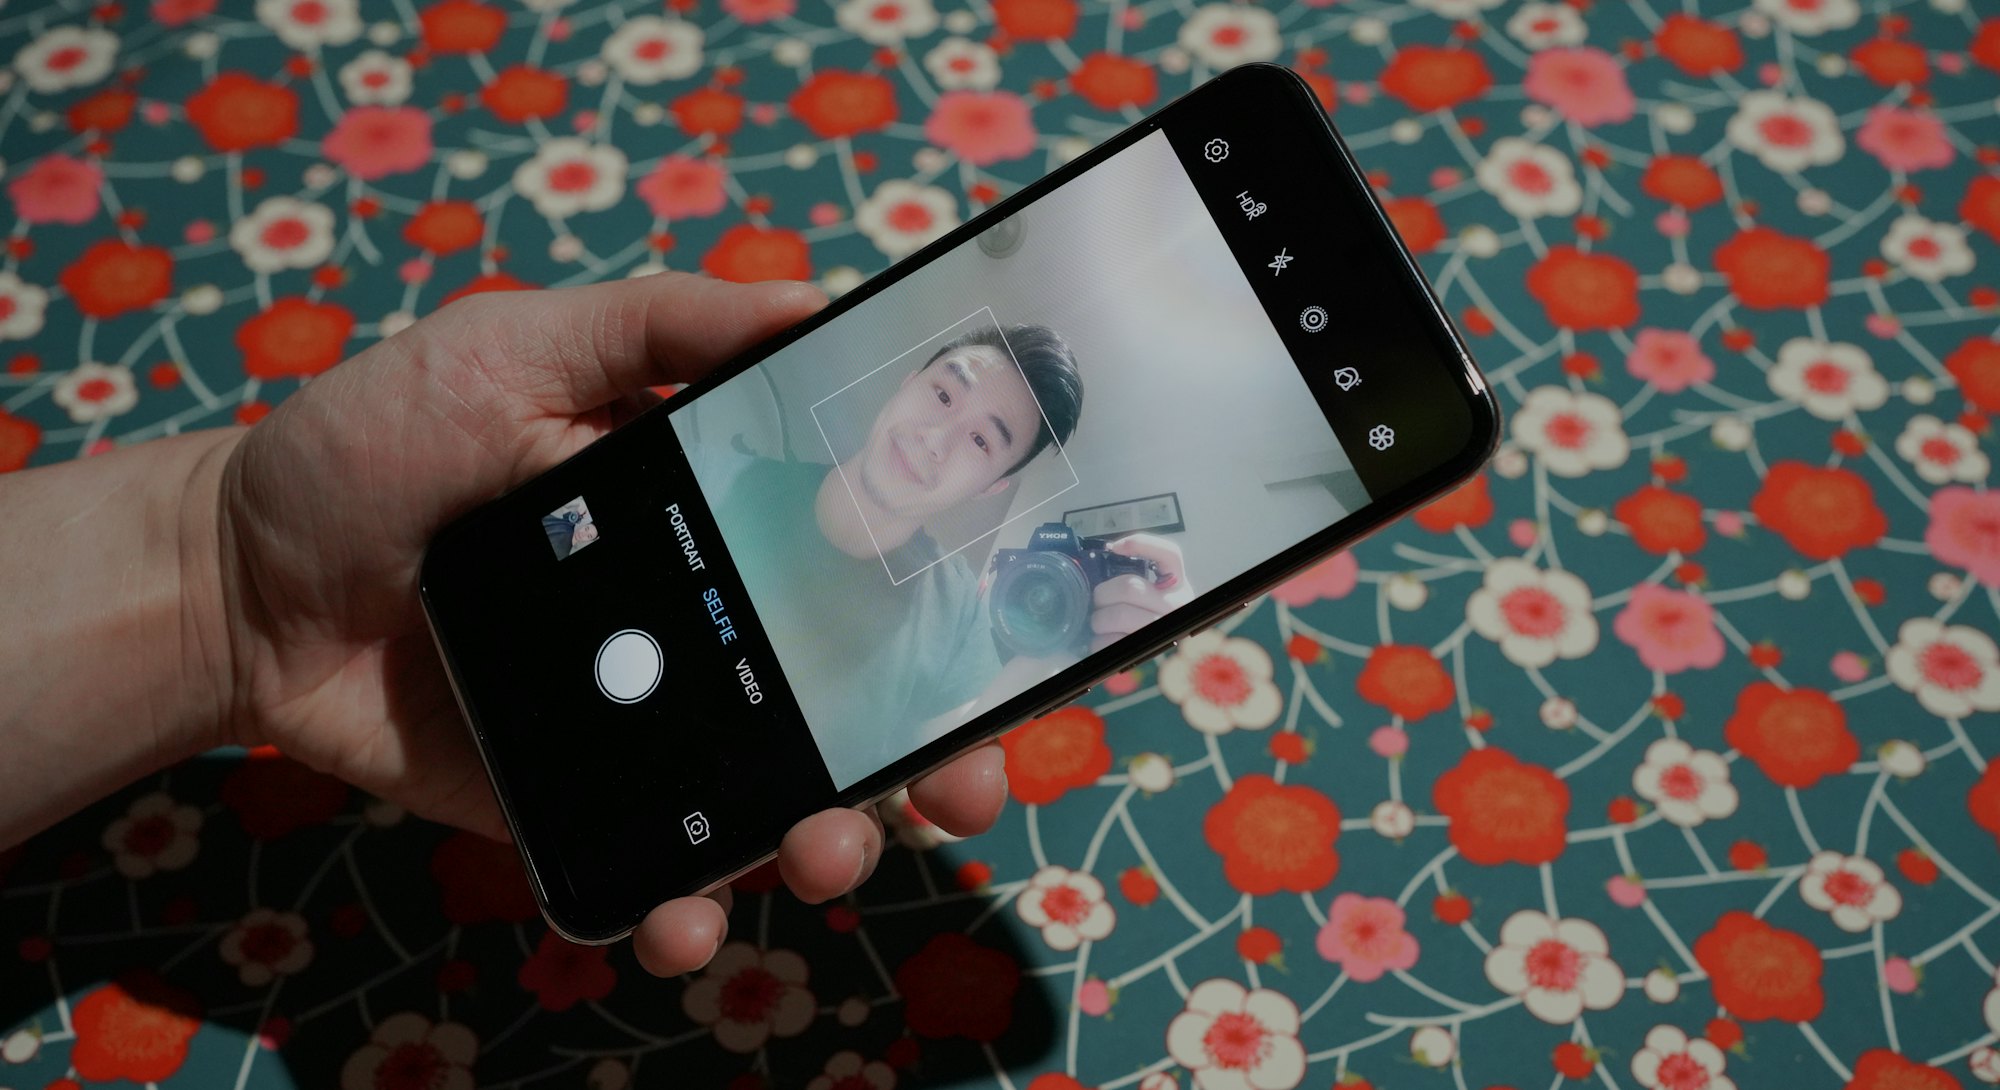 The ZTE Axon 20 5G phone has an 'invisible' selfie camera inside the screen, but is it any good?